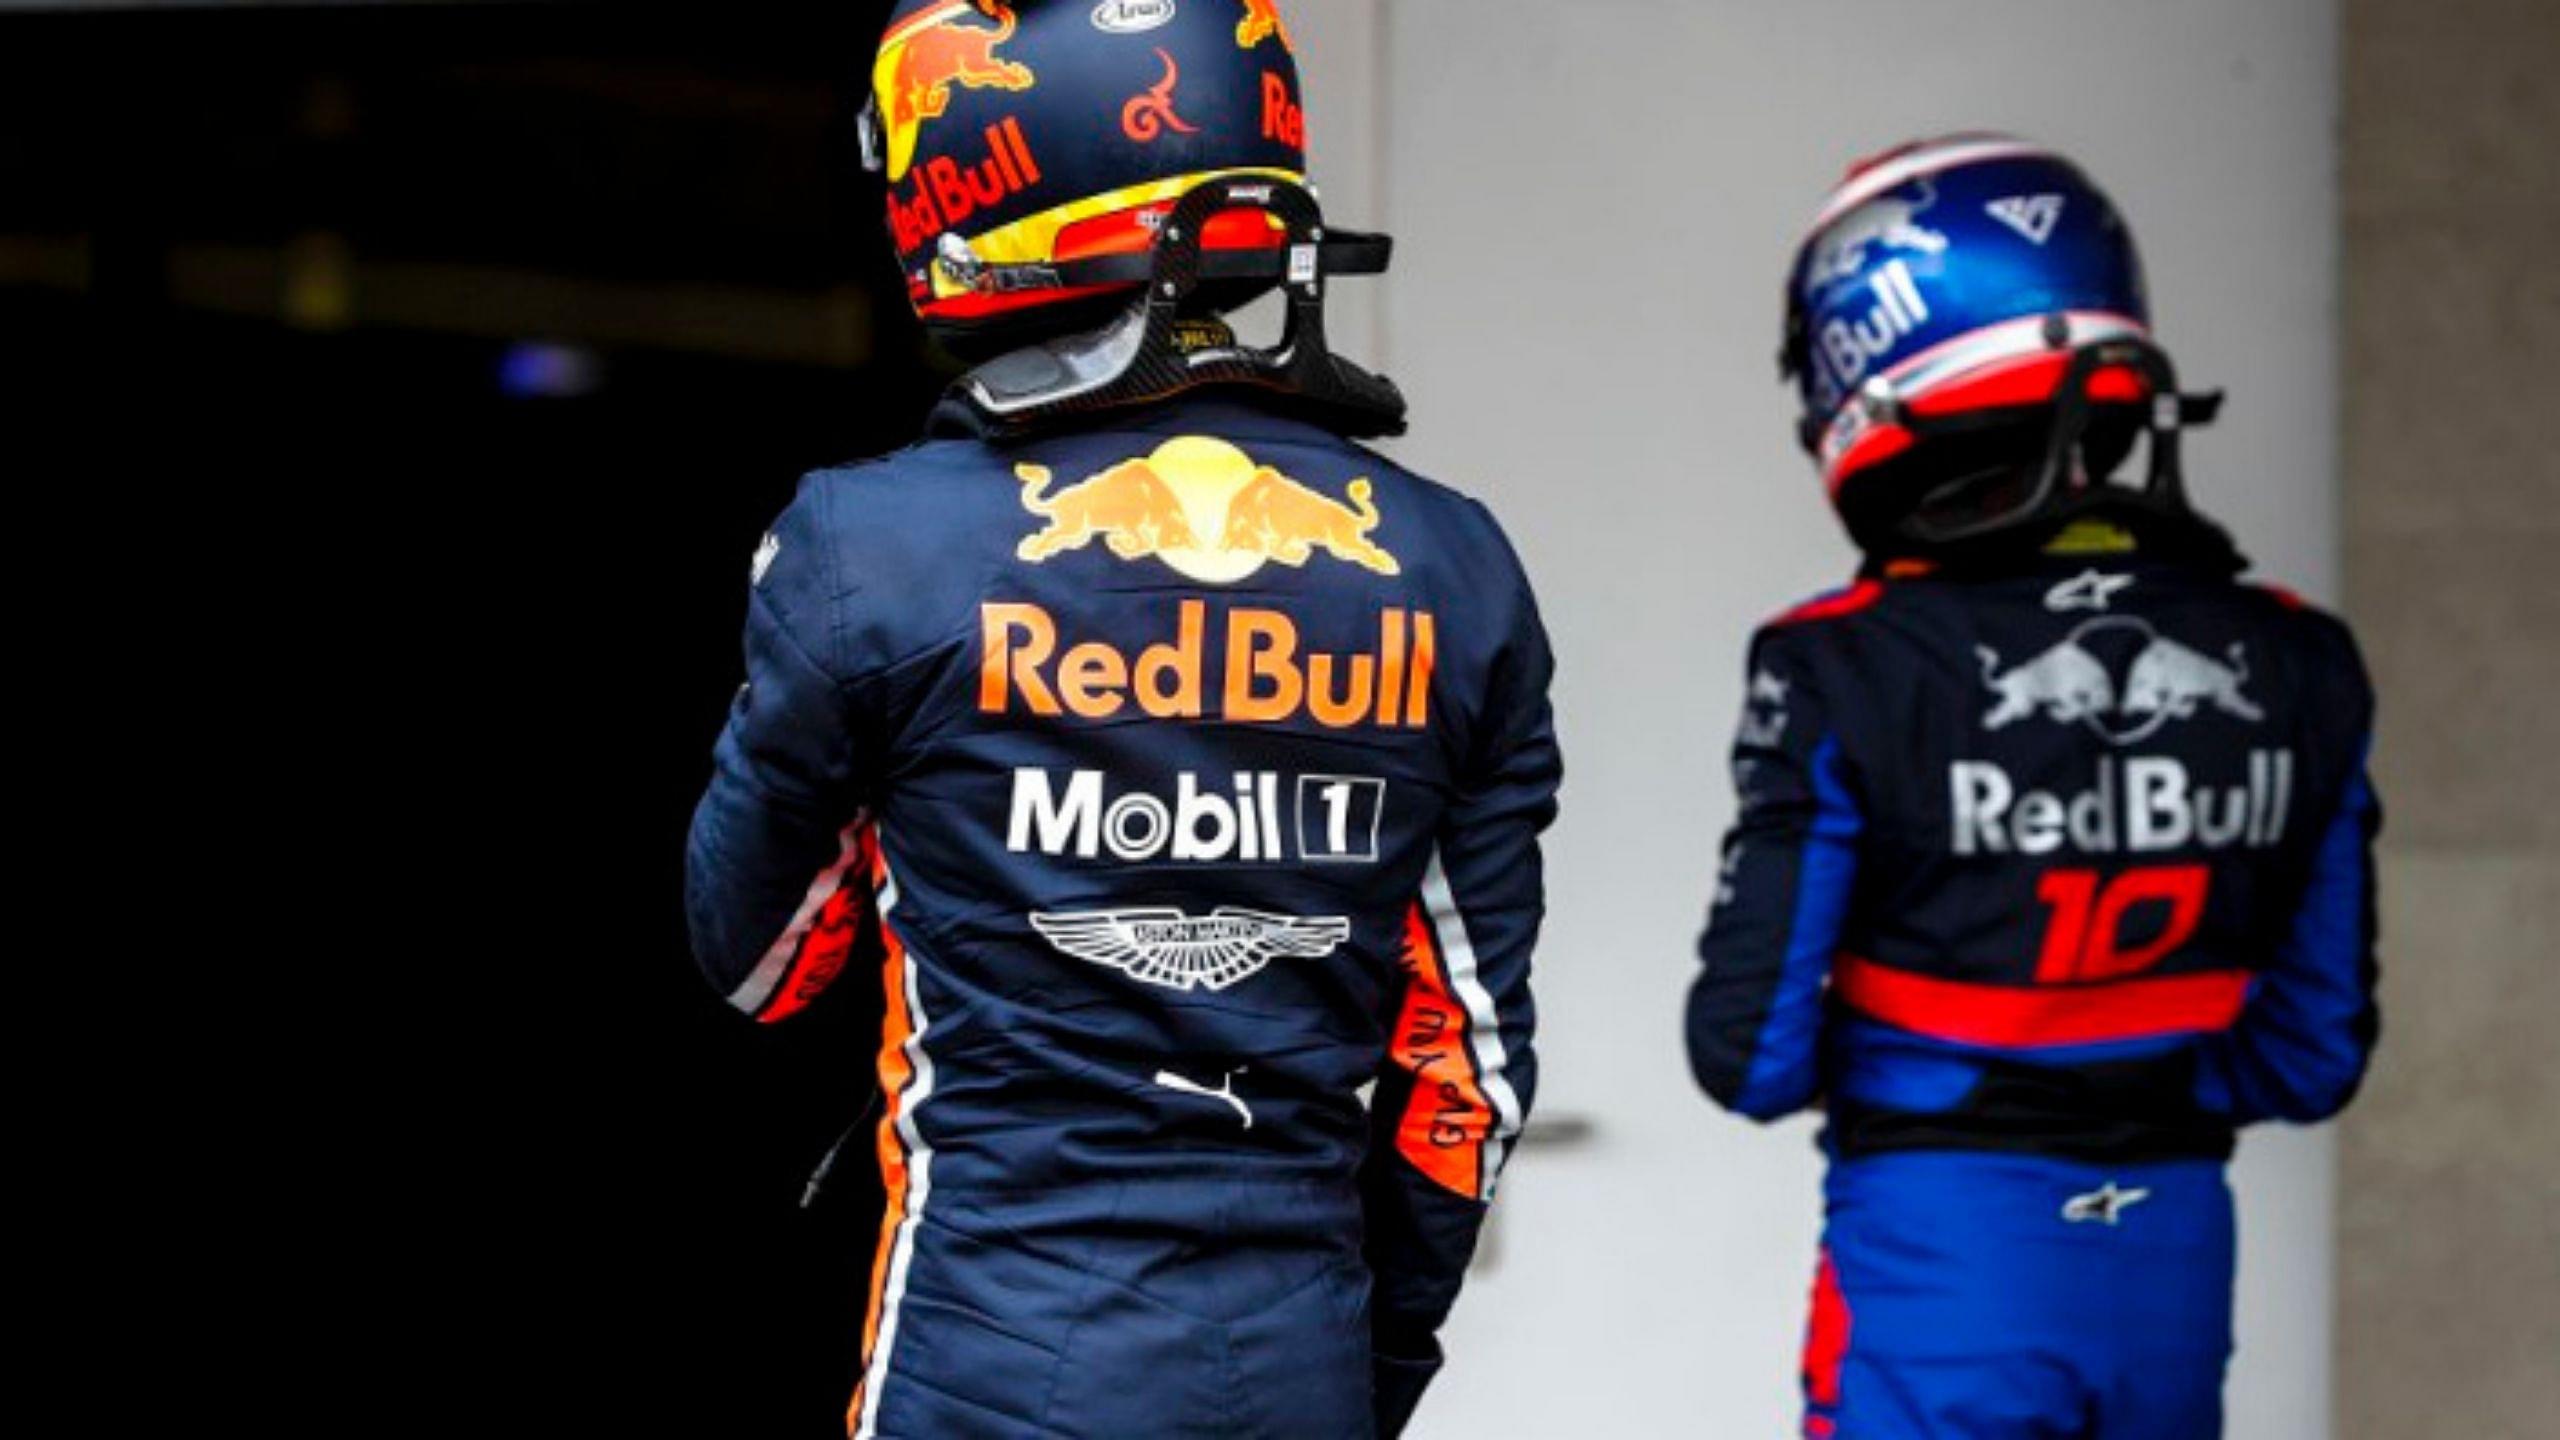 "I think it'd be tough for any driver to currently go up against Max" - Red Bull F1 boss Christian Horner defends Alex Albon in battle vs Max Verstappen